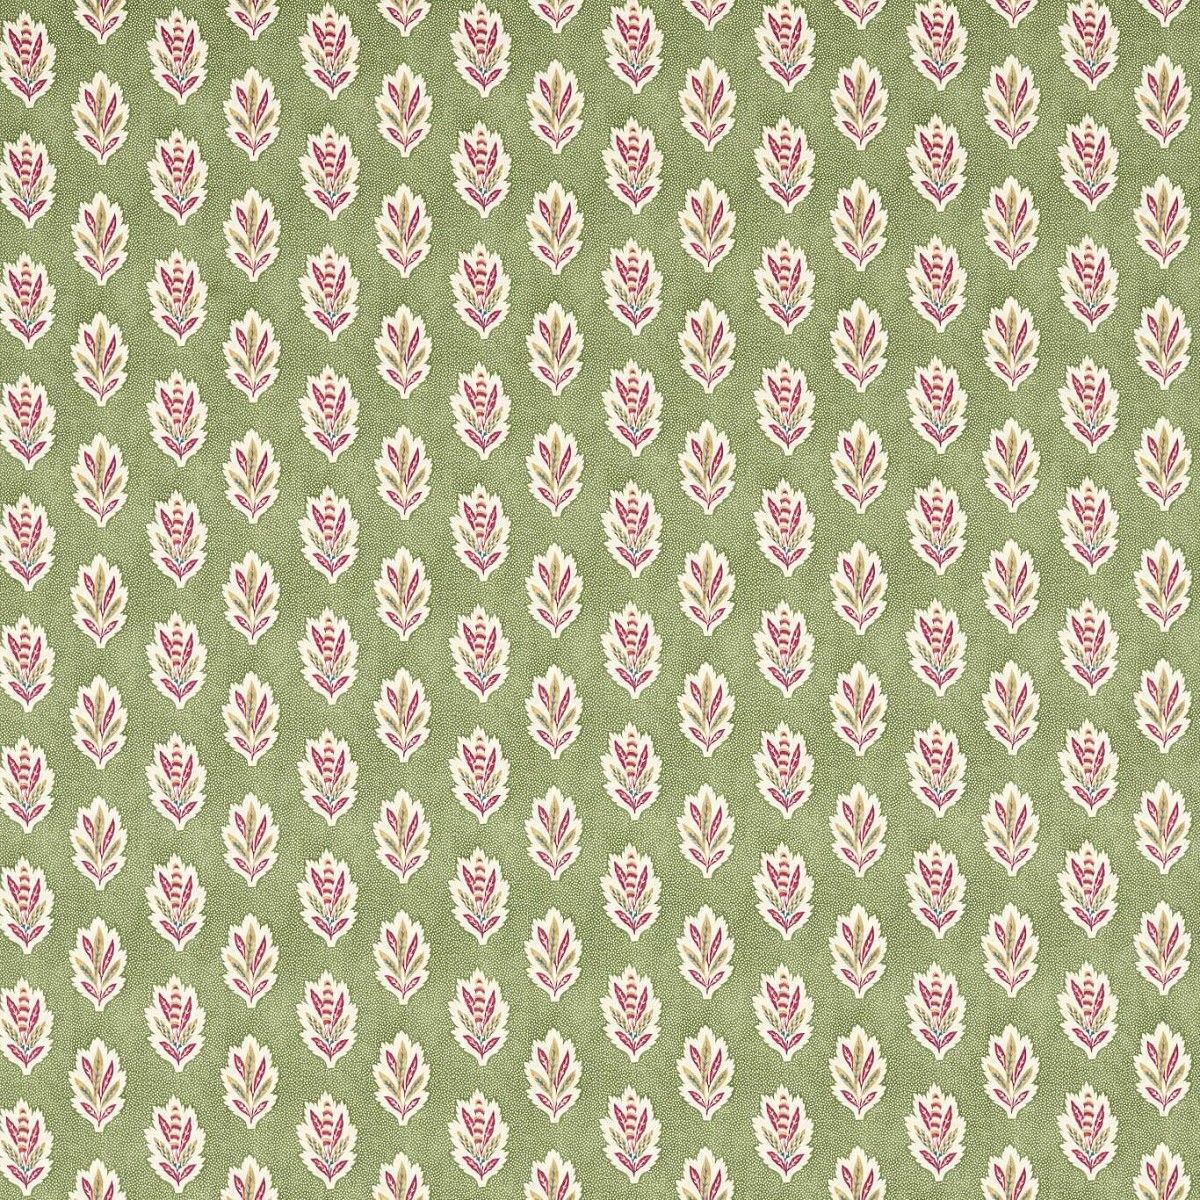 Sessile Leaf Forest Green Fabric by Sanderson